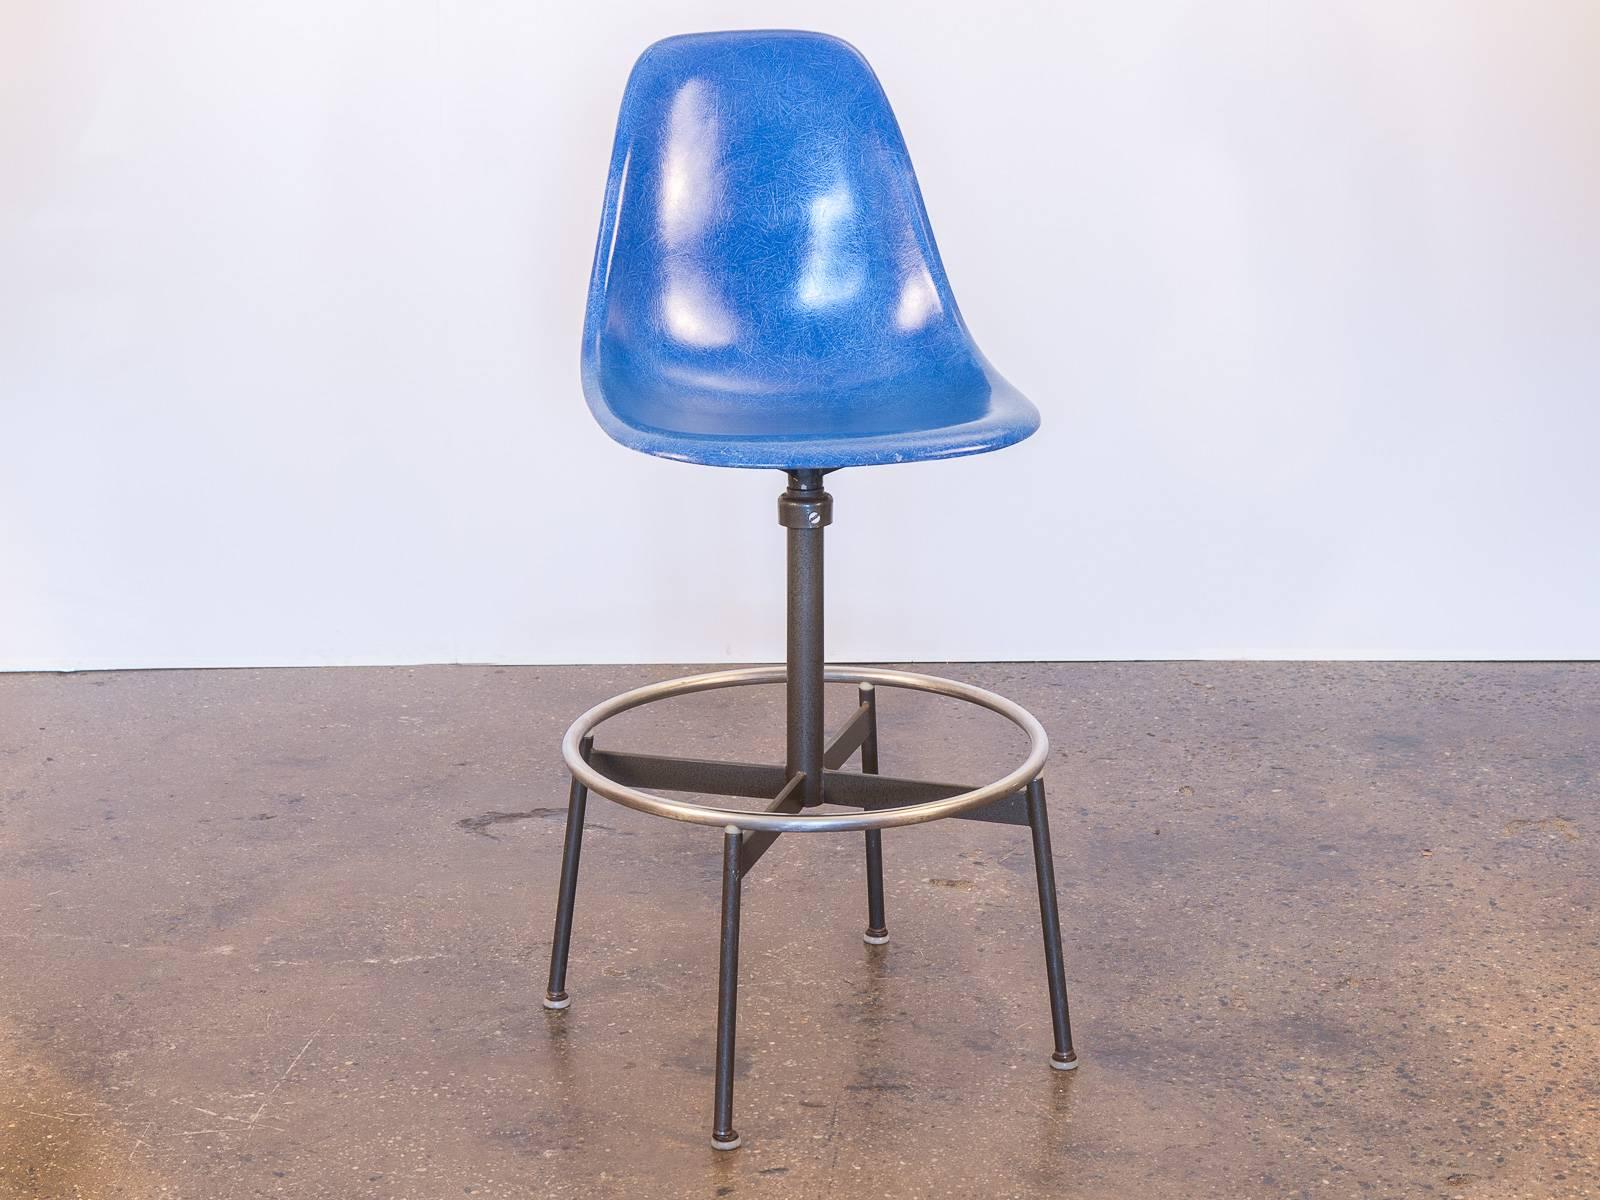 We have a gleaming Eames blue fiberglass shell chair on an original Herman Miller drafting swivel base. Sleek, Classic drafting stool for work or home office. Solid metal base in is excellent condition, with all original glides. Other shells are